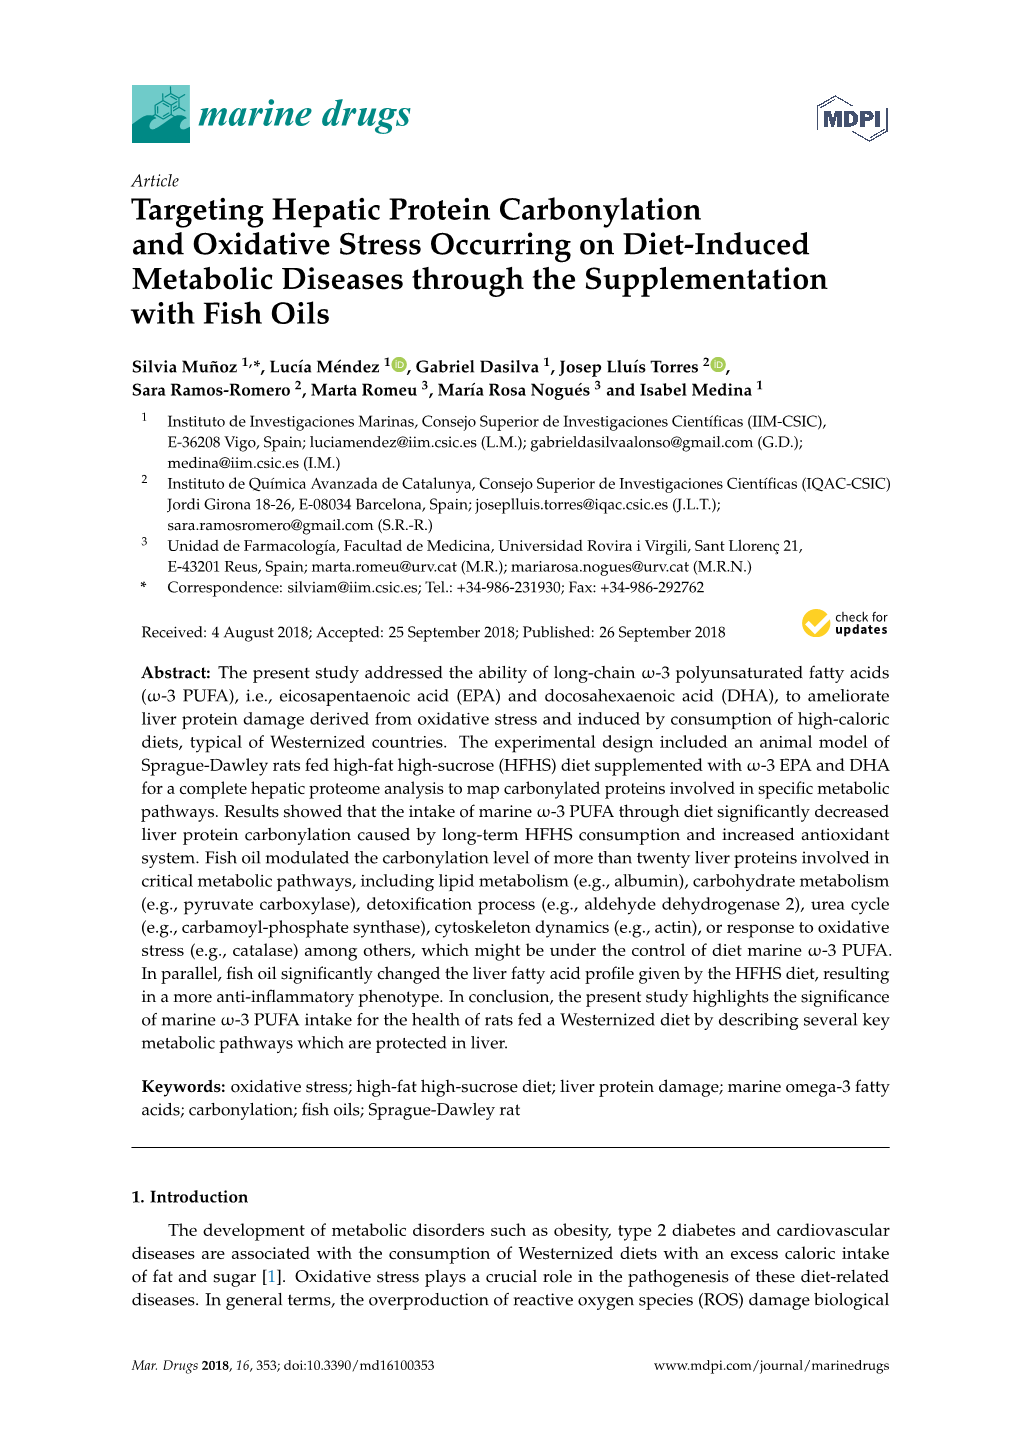 Targeting Hepatic Protein Carbonylation and Oxidative Stress Occurring on Diet-Induced Metabolic Diseases Through the Supplementation with Fish Oils